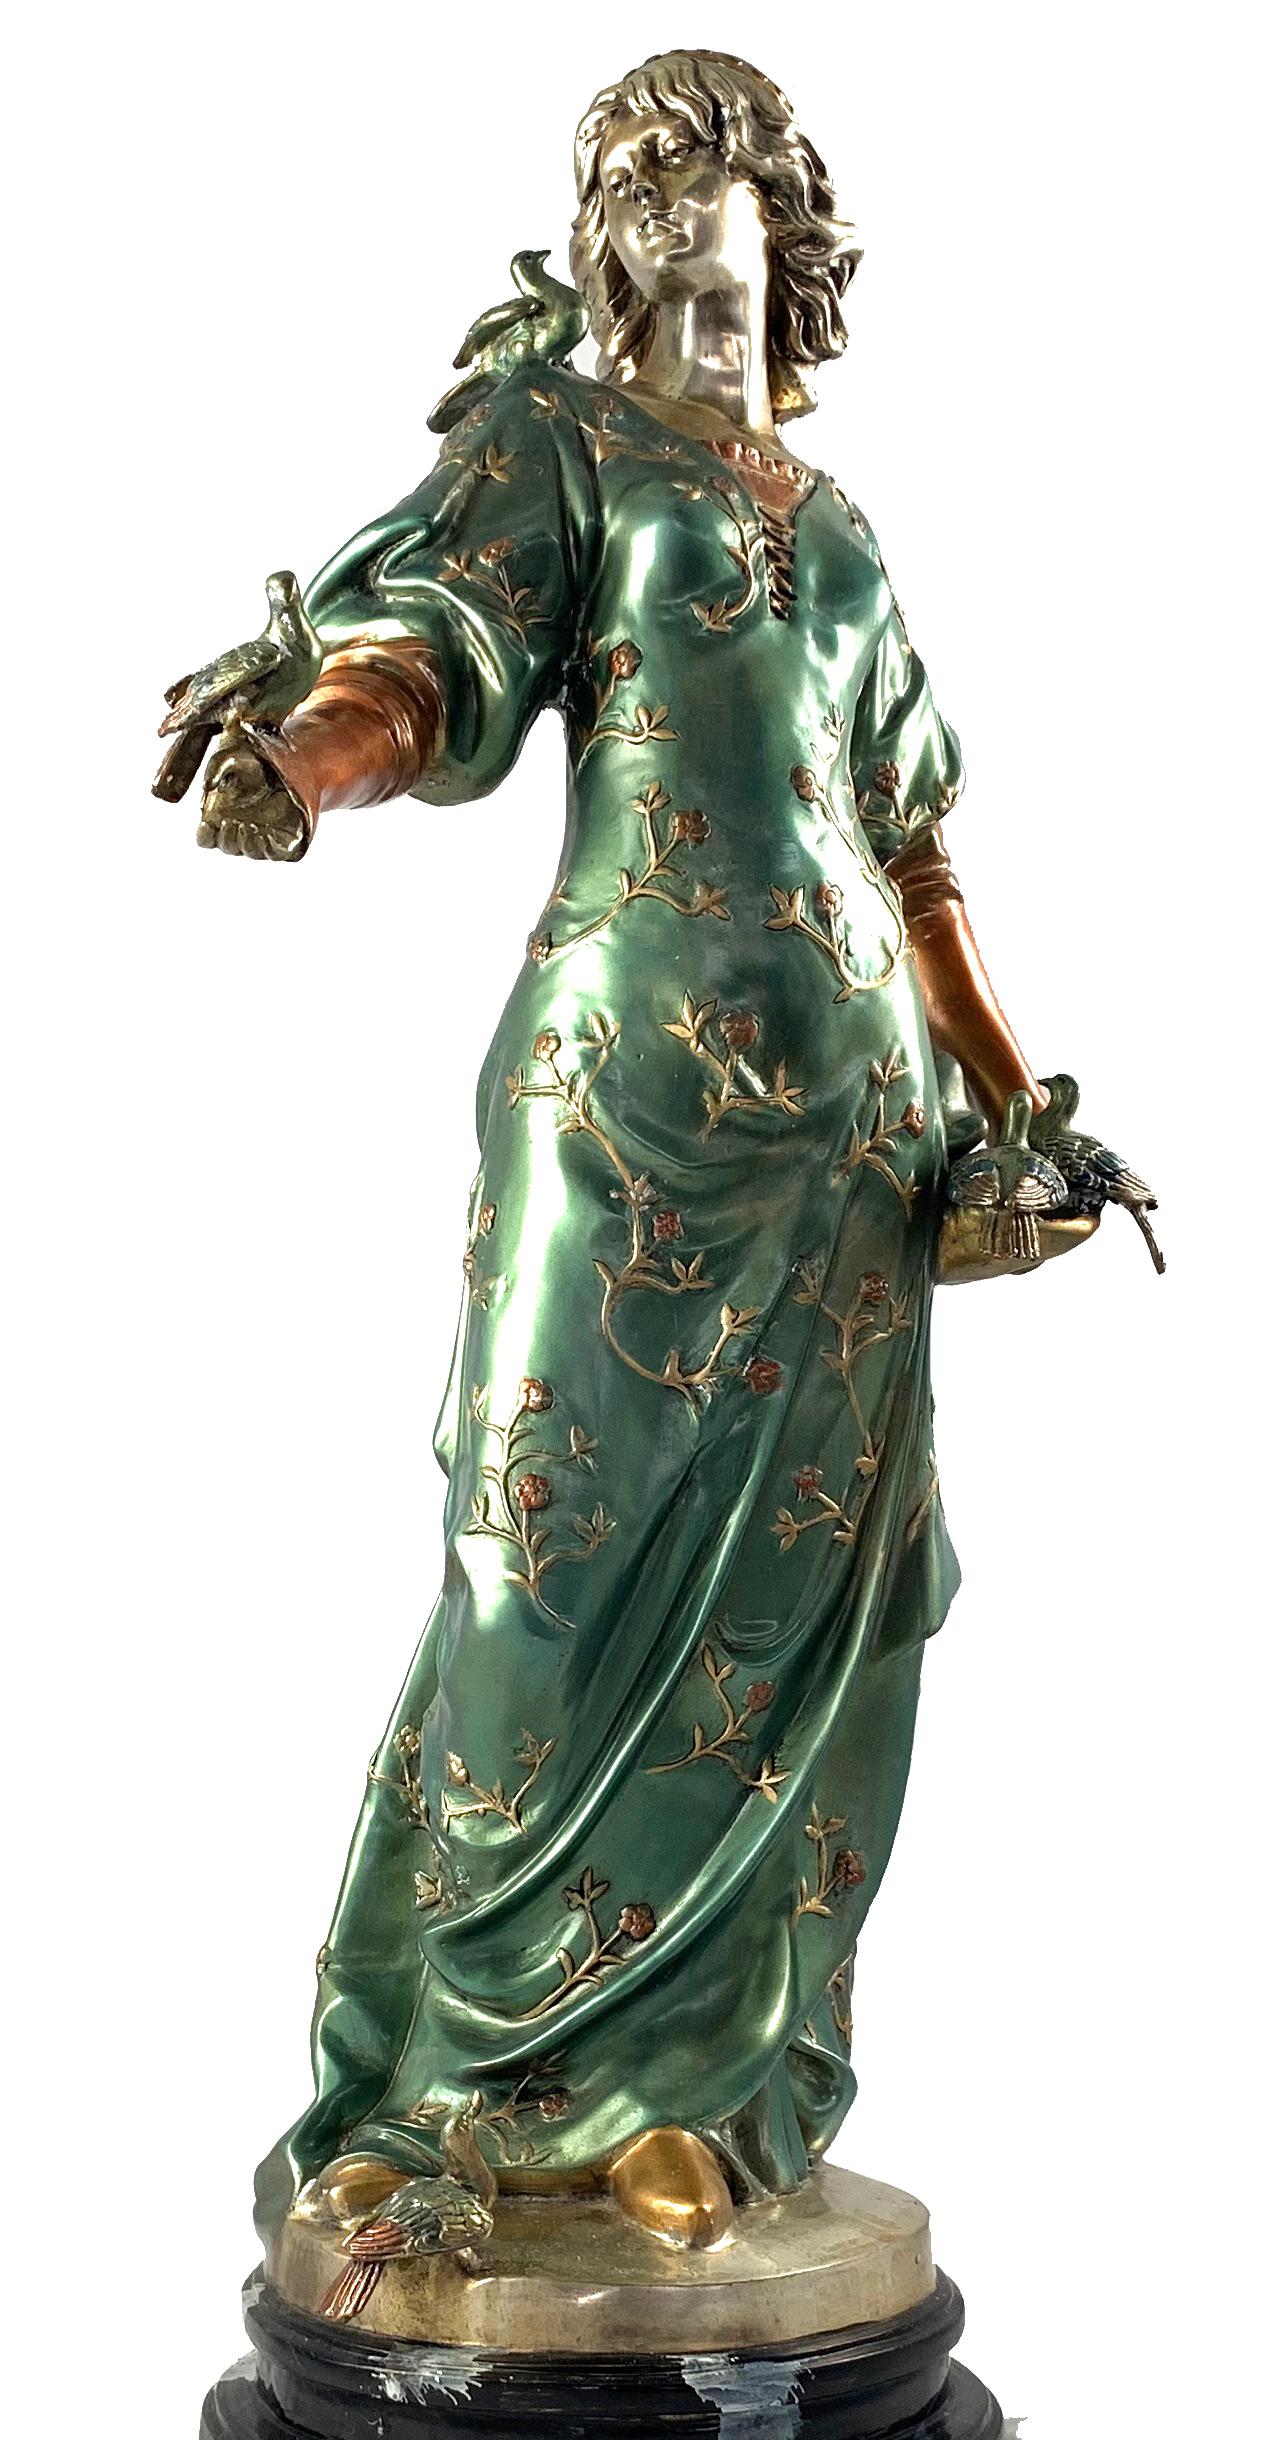 A fine example of cold painted bronze figure of a woman. French 20th century. Cast with flowing robes a small bird perched on her outstretched arm. Decorated in green an gold and supported on a dark green Antico marble base.